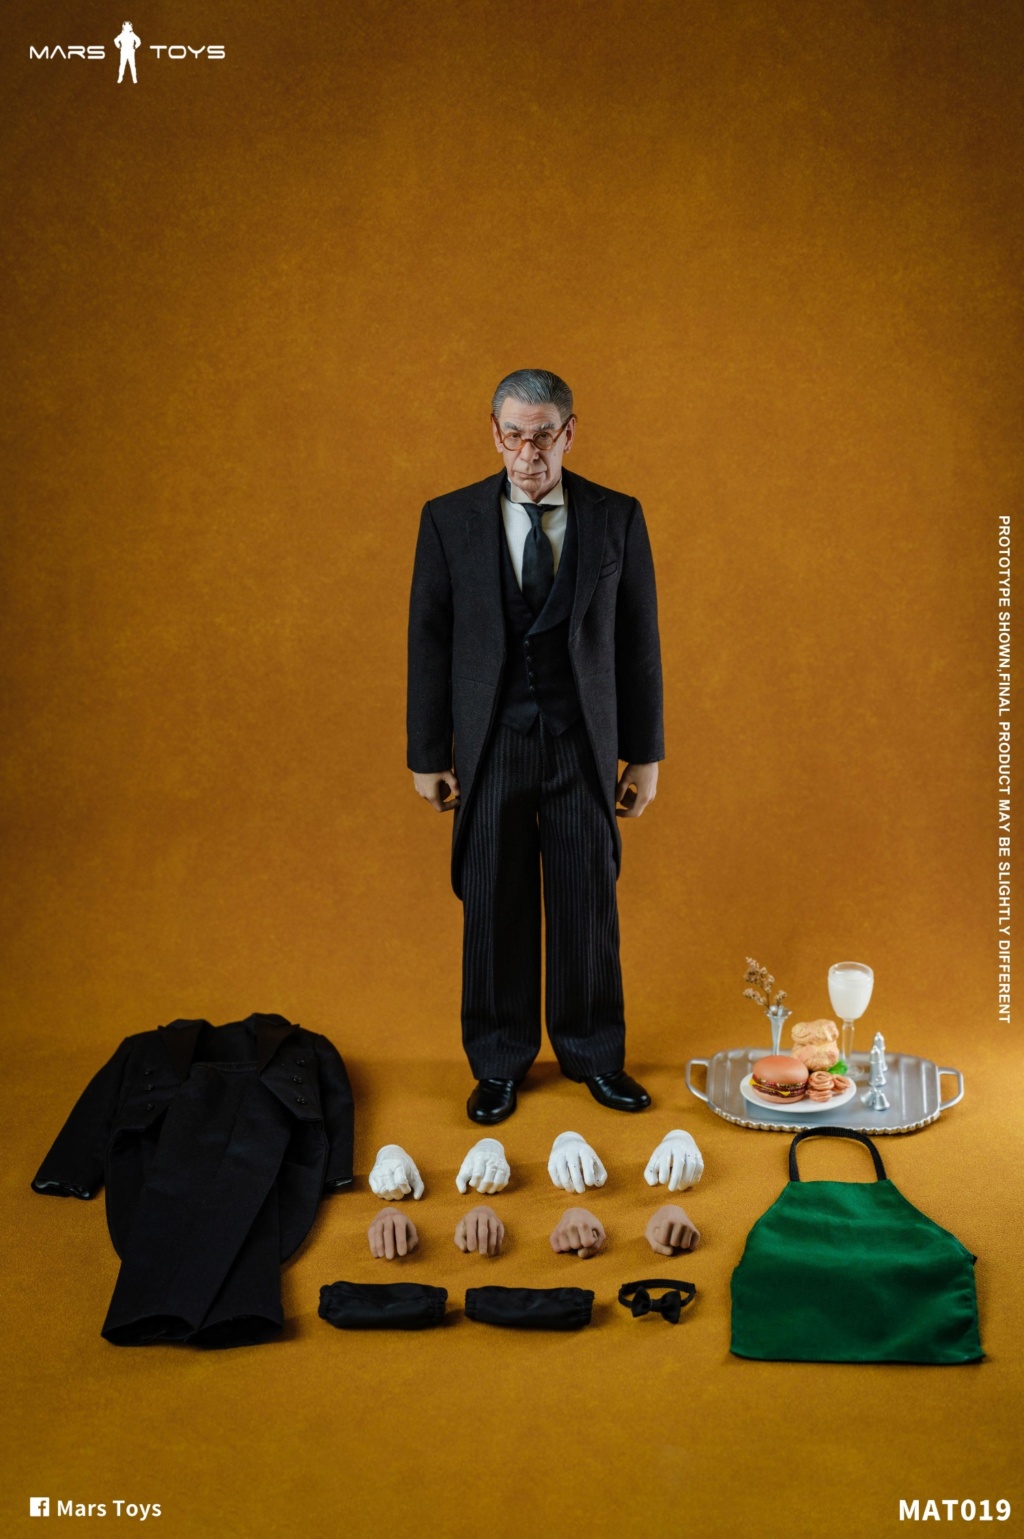 OldHousekeeper - NEW PRODUCT: Mars Toys: 1/6 Old Housekeeper Mr.A Action Figure MAT019 47011110